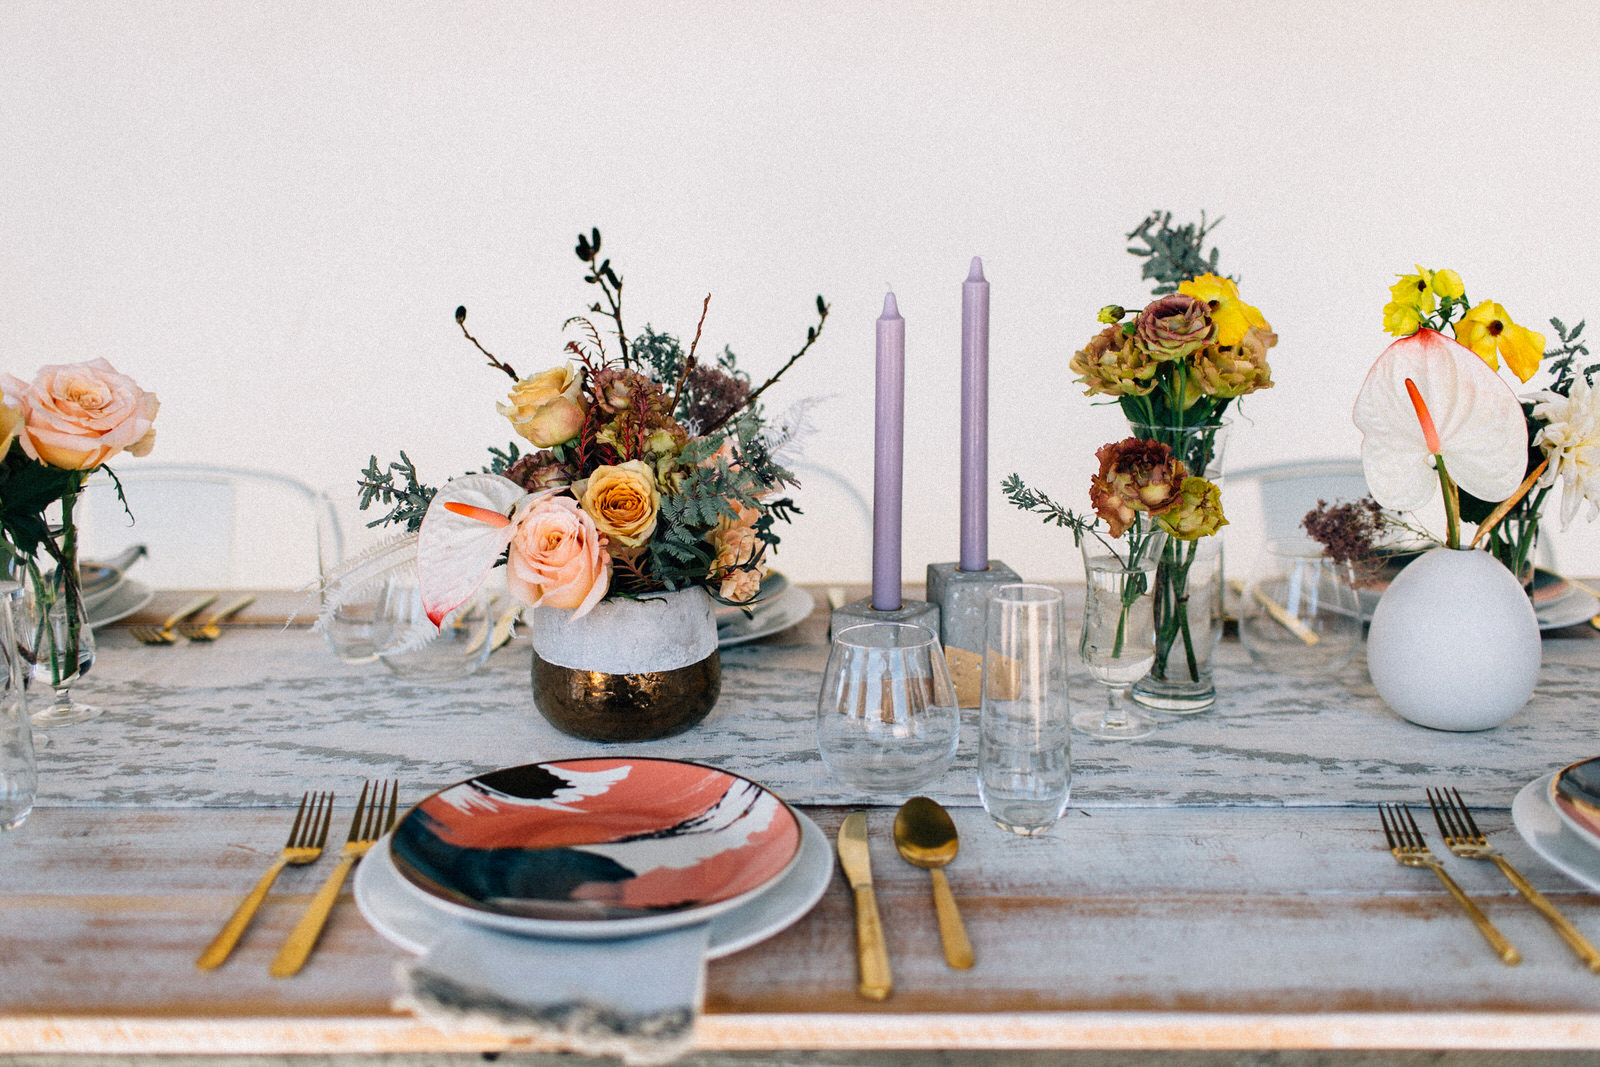 palm springs joshua tree elopement wedding styled shoot fuck yeah weddings feminist photo vaycay kendall lauren shea floral arrangement table arch alter lesbian lgbtq couple of color